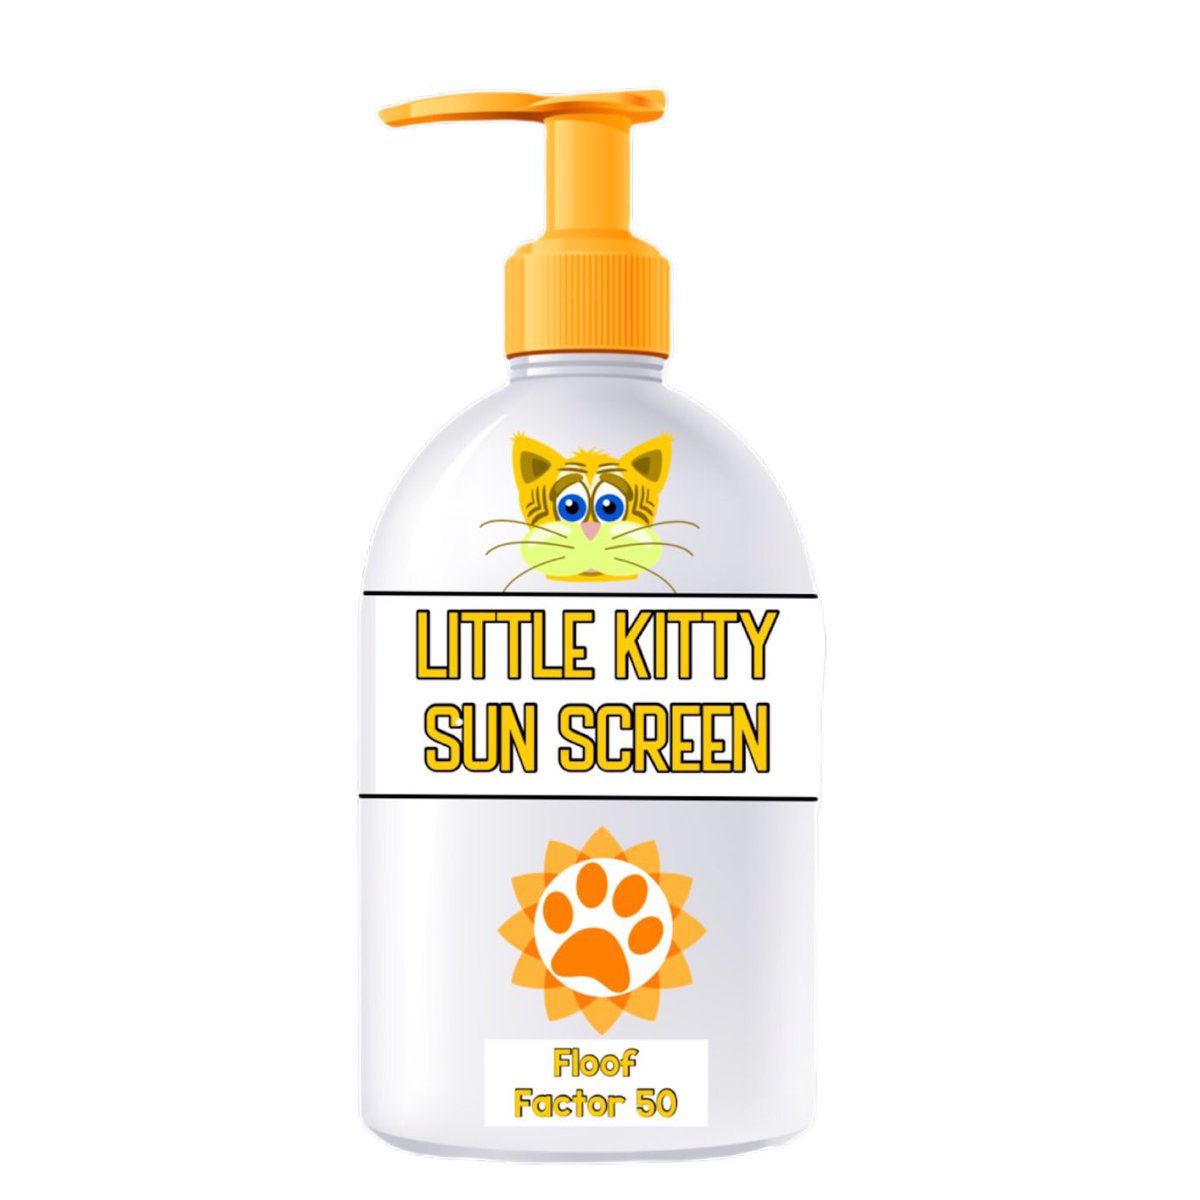 It’s a scorcher out here today floofers, so we recommend using Floof Factor 50 Little Kitty Sun Screen before you race off to the Sheepie Sports Field for the fun and games! 😻☀️#hedgewatchcafe